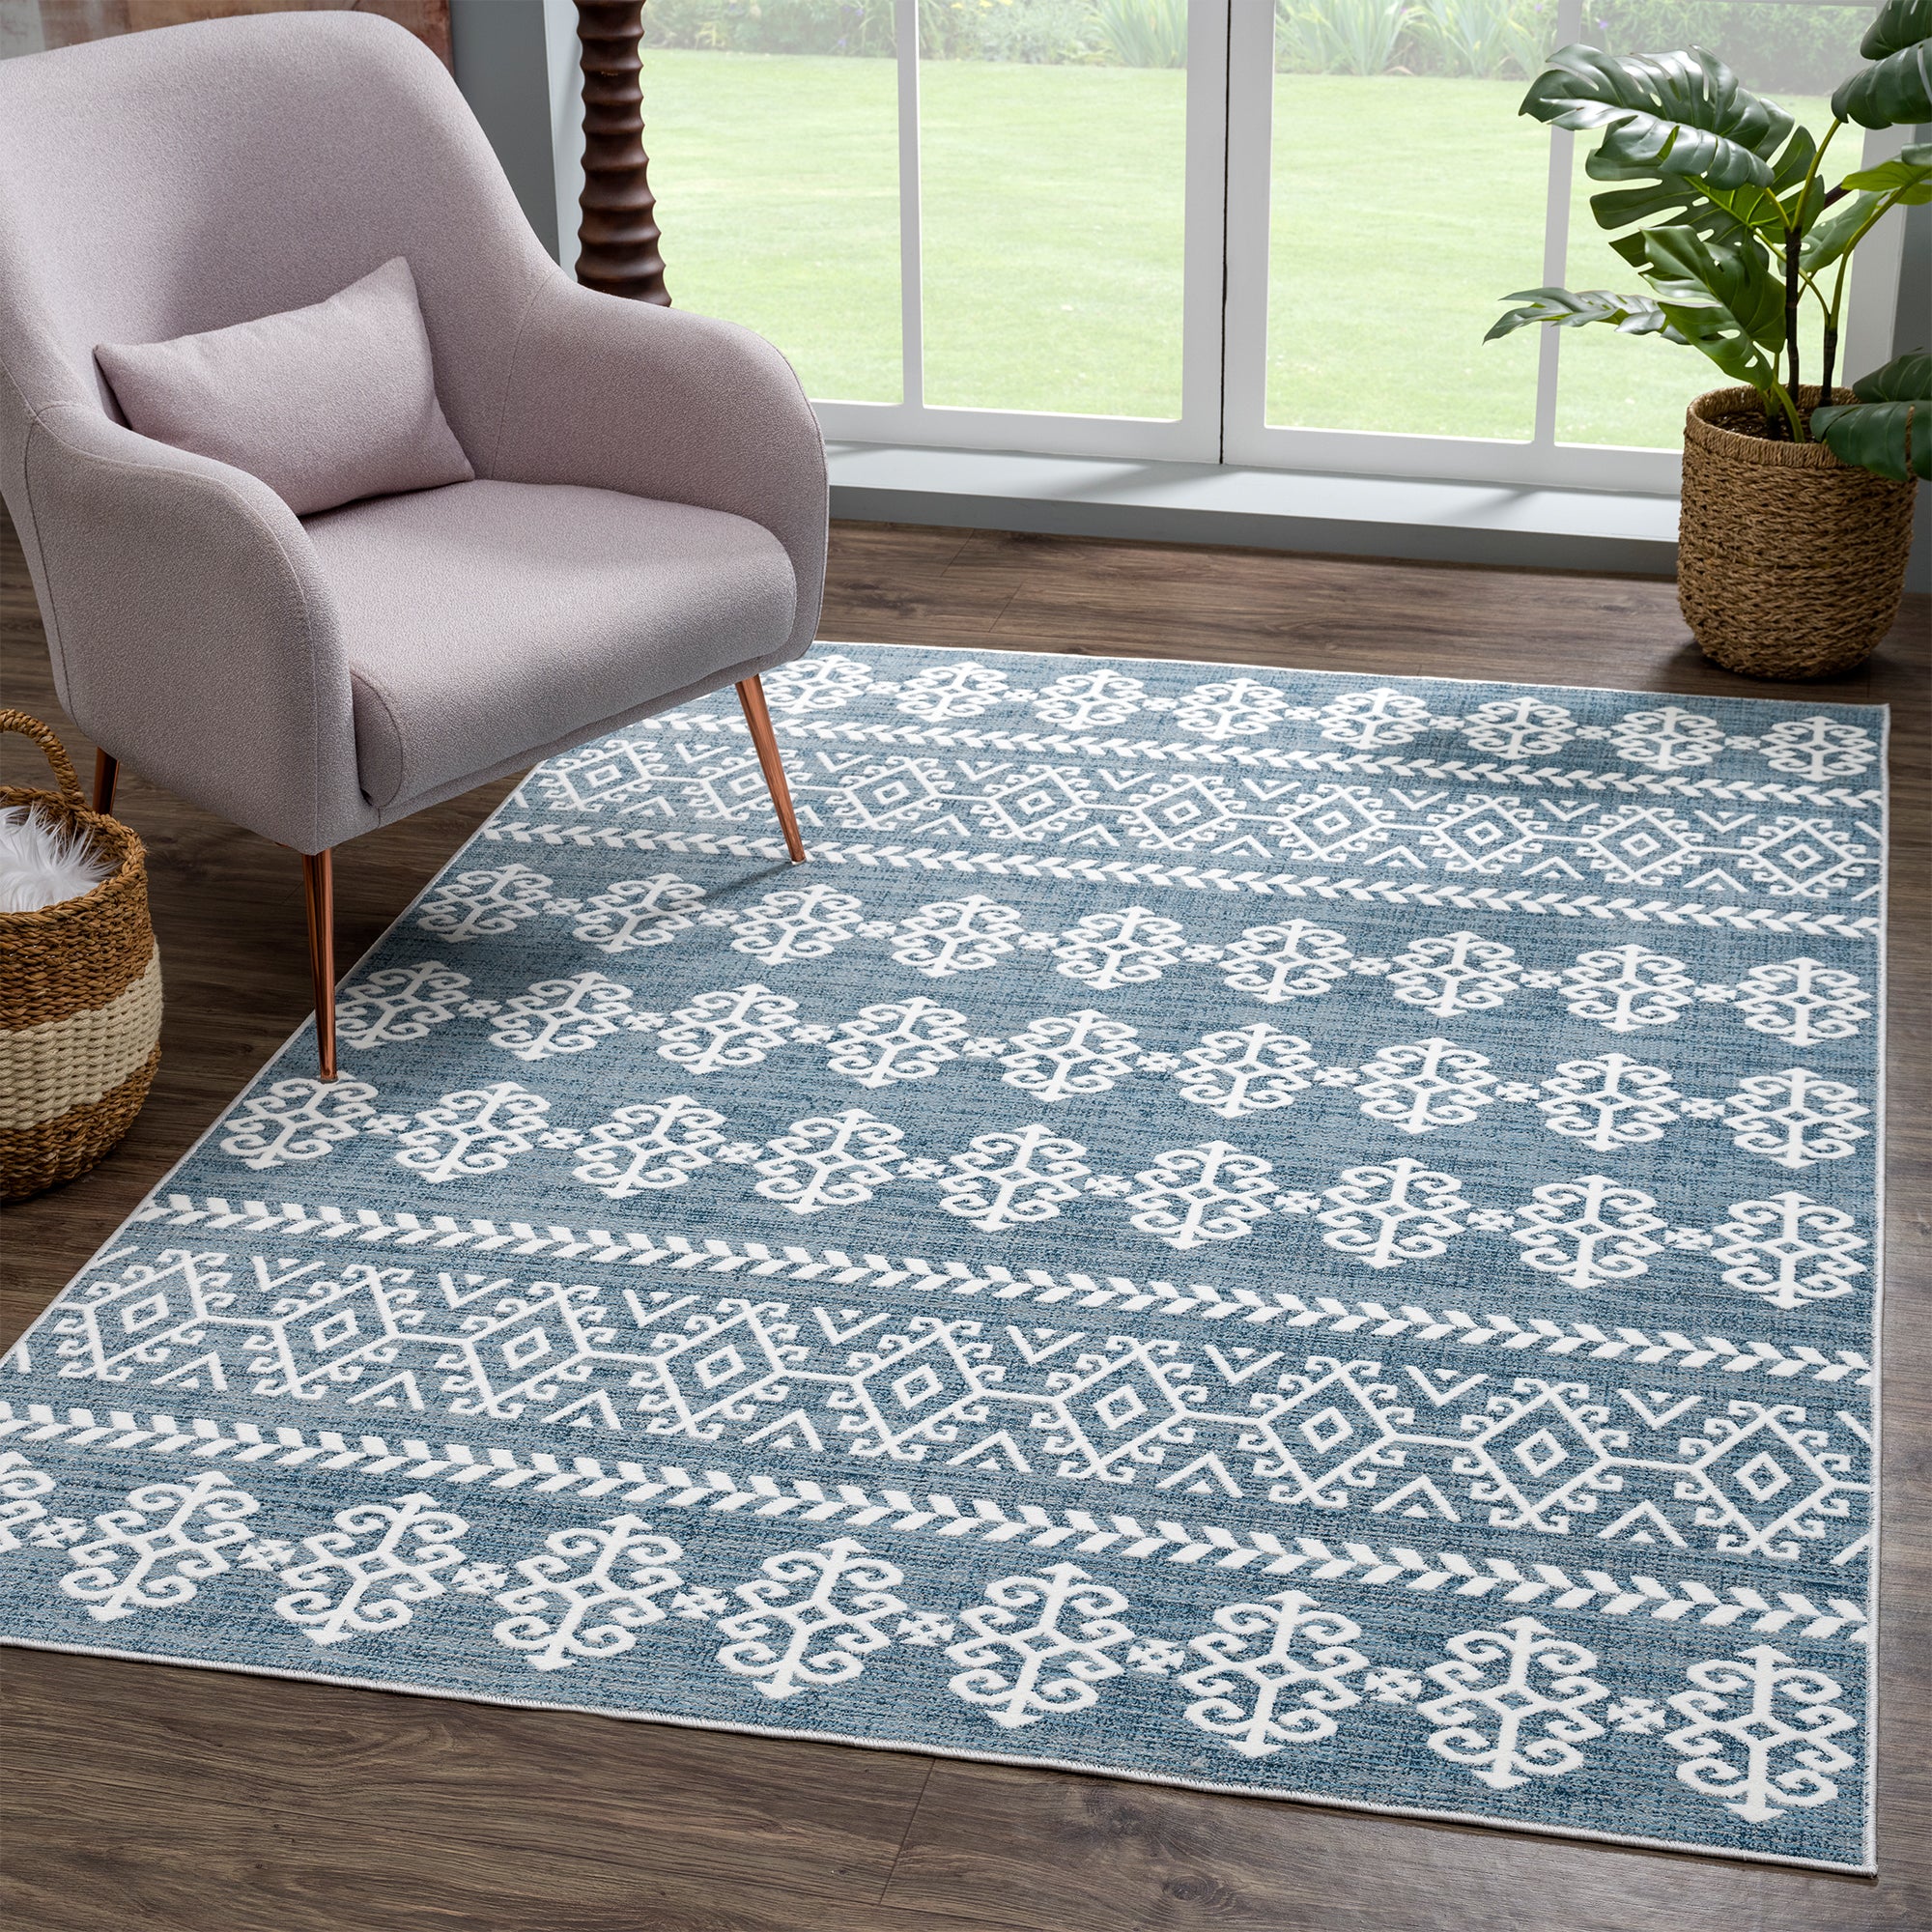 United Weavers Paramount Influential 2660-50160 Blue Rug